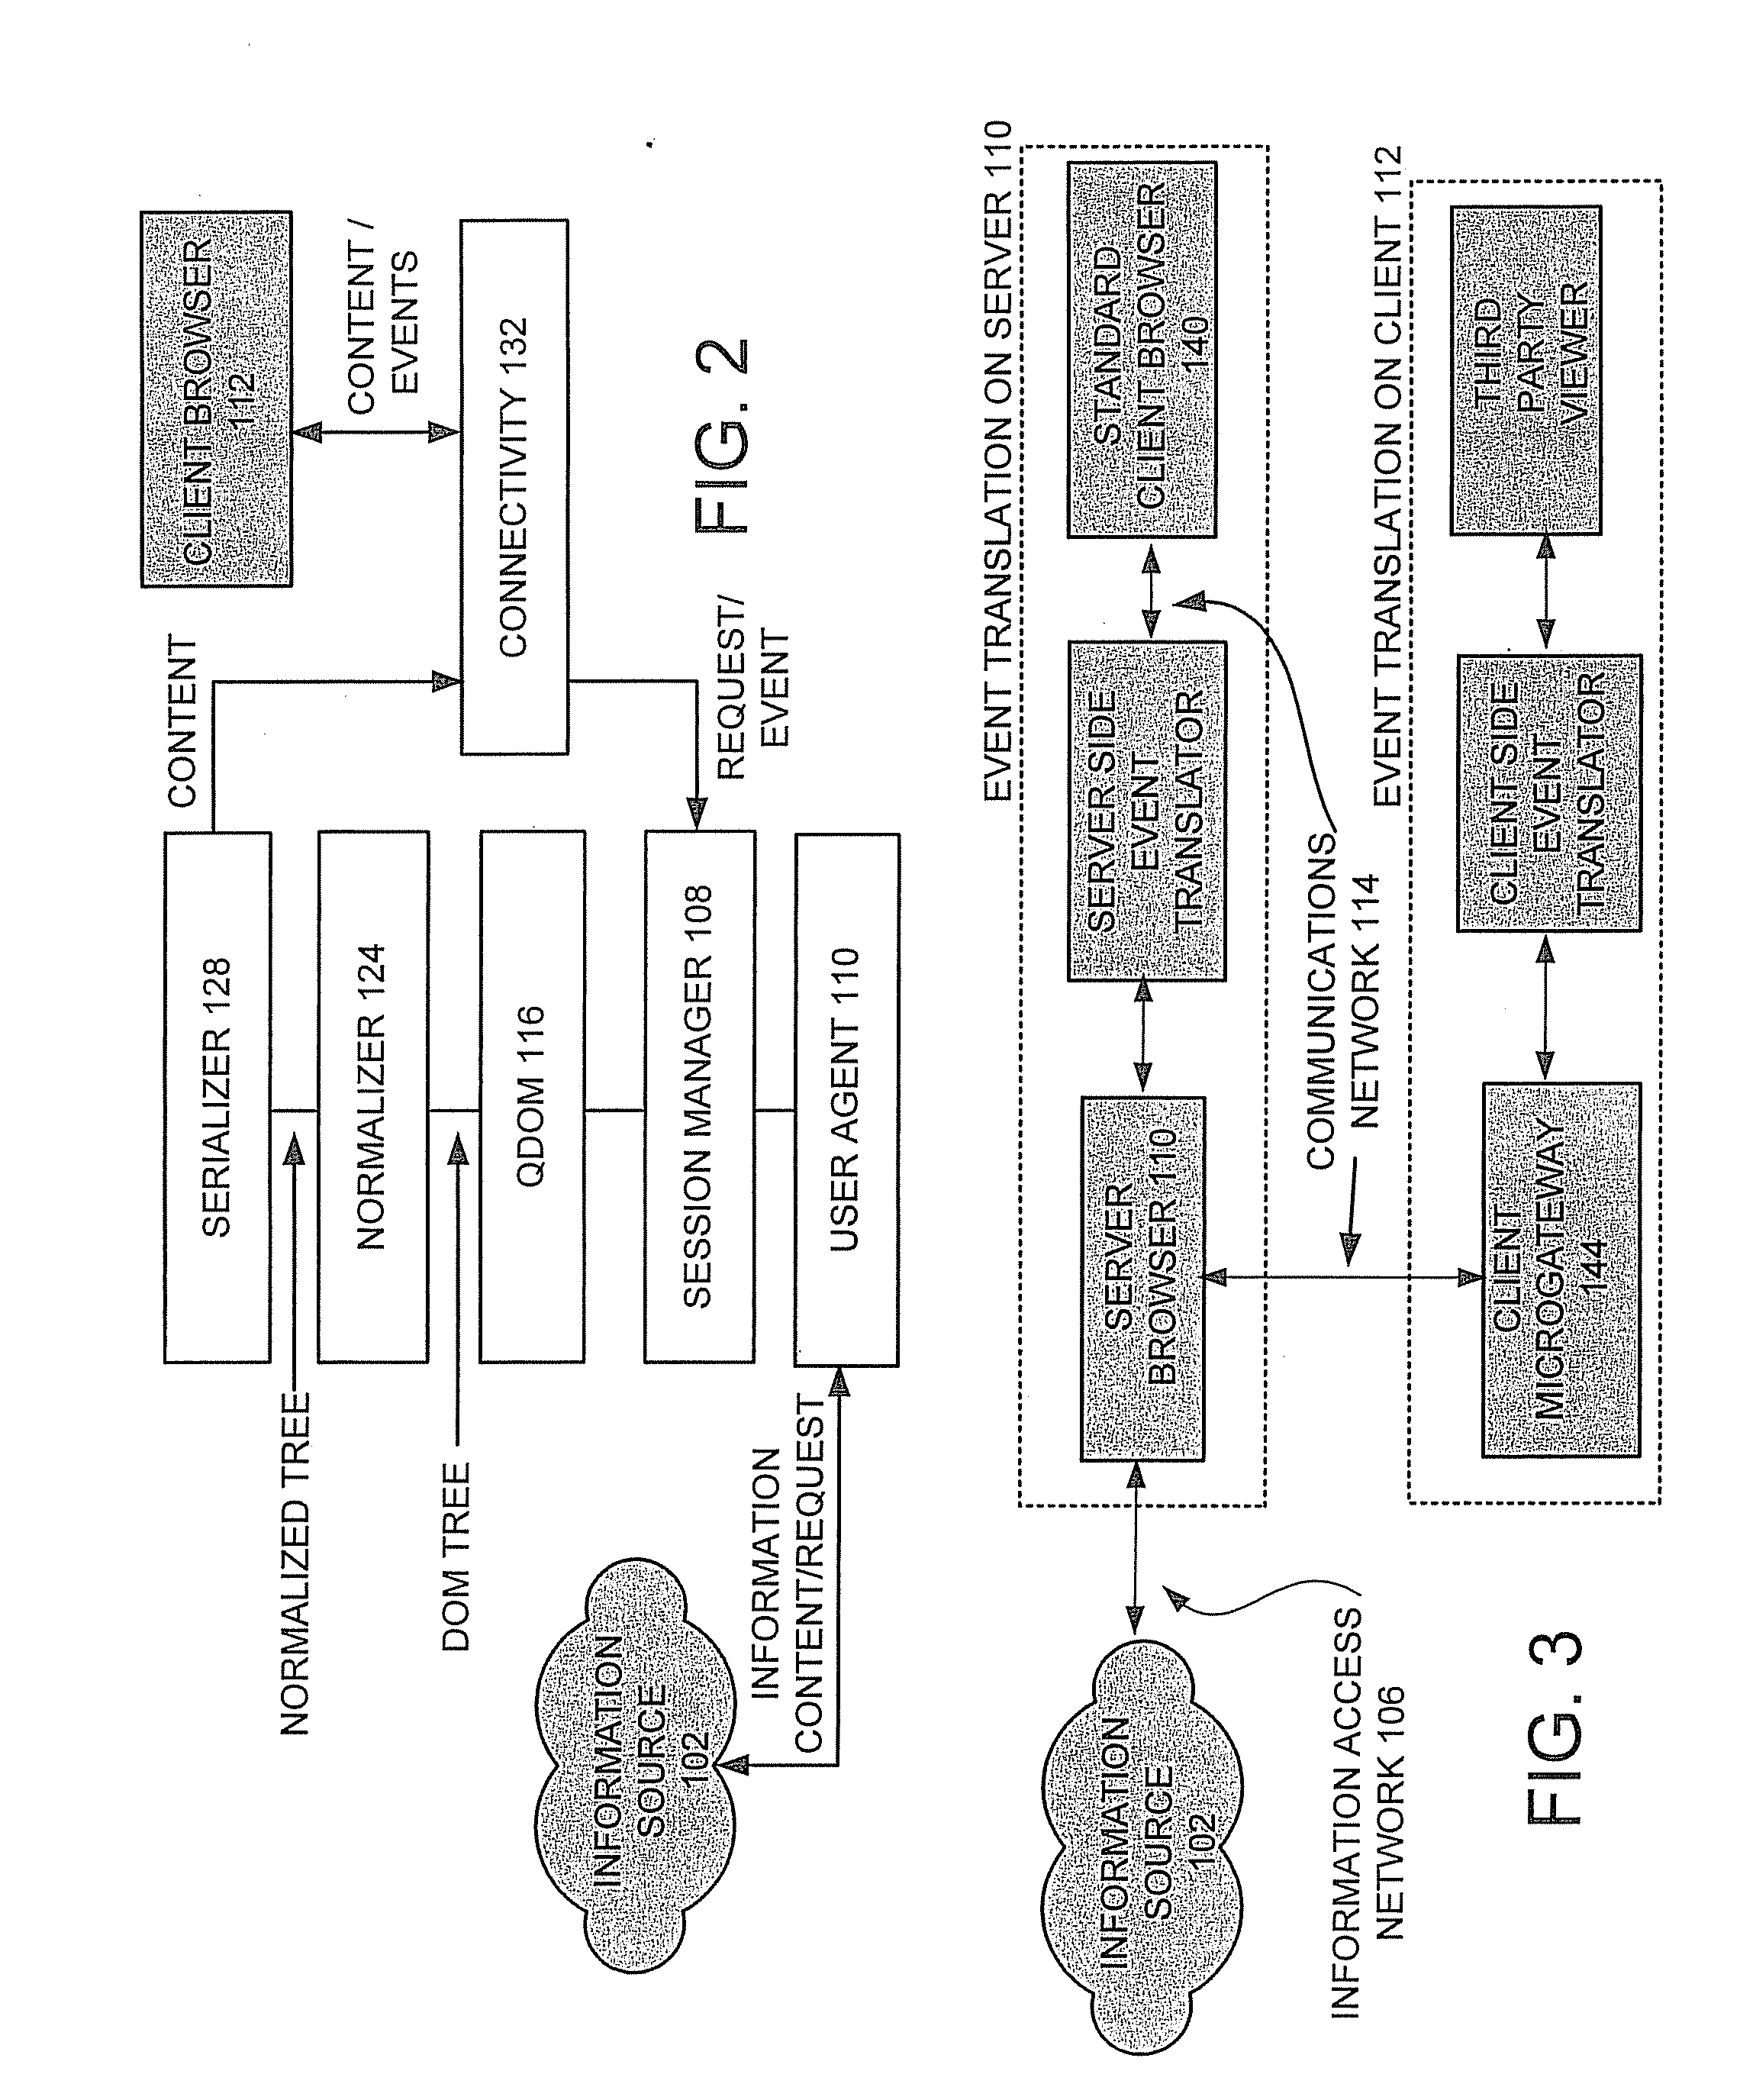 System and Method for Displaying Information Content with Selective Horizontal Scrolling